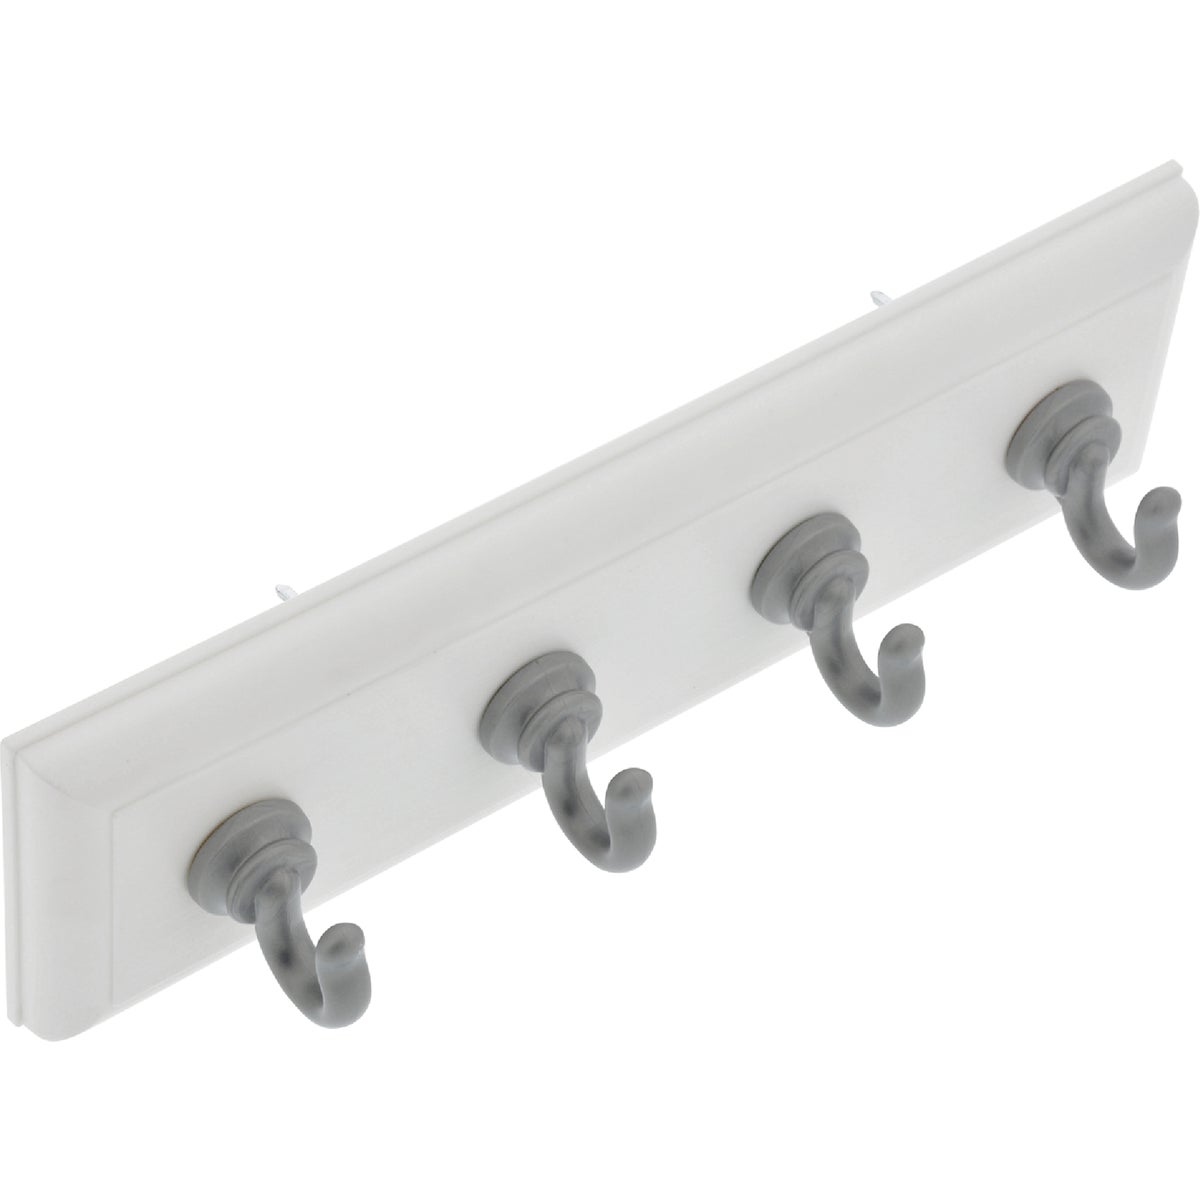 Hillman High and Mighty 10 Lb. Capacity White Key Rail with Silver Hooks